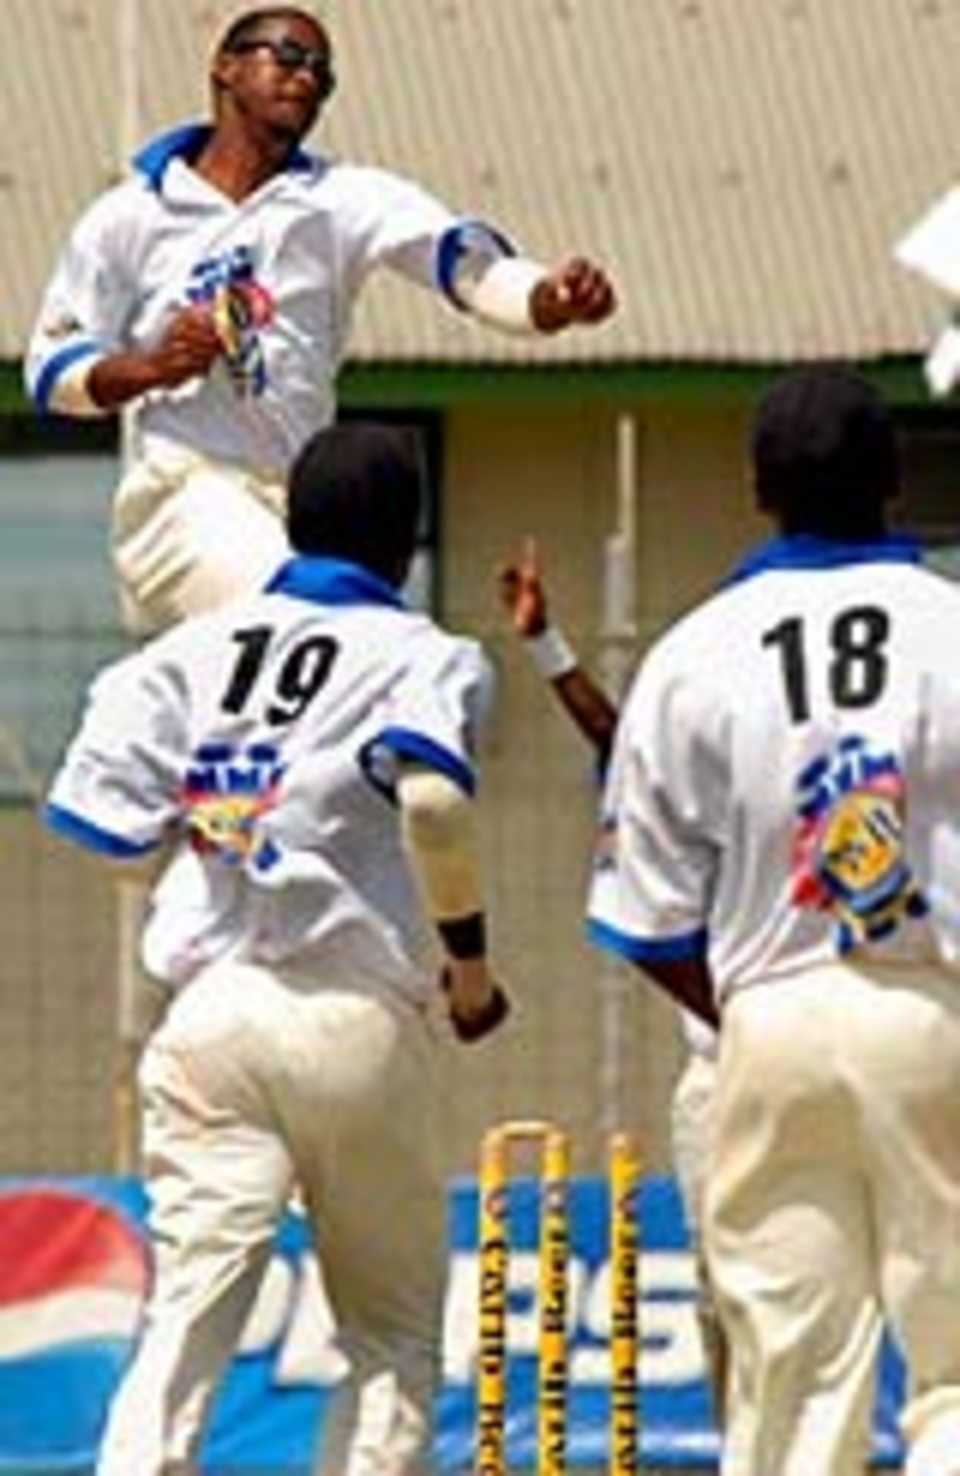 Dwayne Smith celebrates one of his four victims, Barbados v Trinidad & Tobago, Carib Challenge final, Pointe-a-Pierre, 3rd day, February 24, 2007